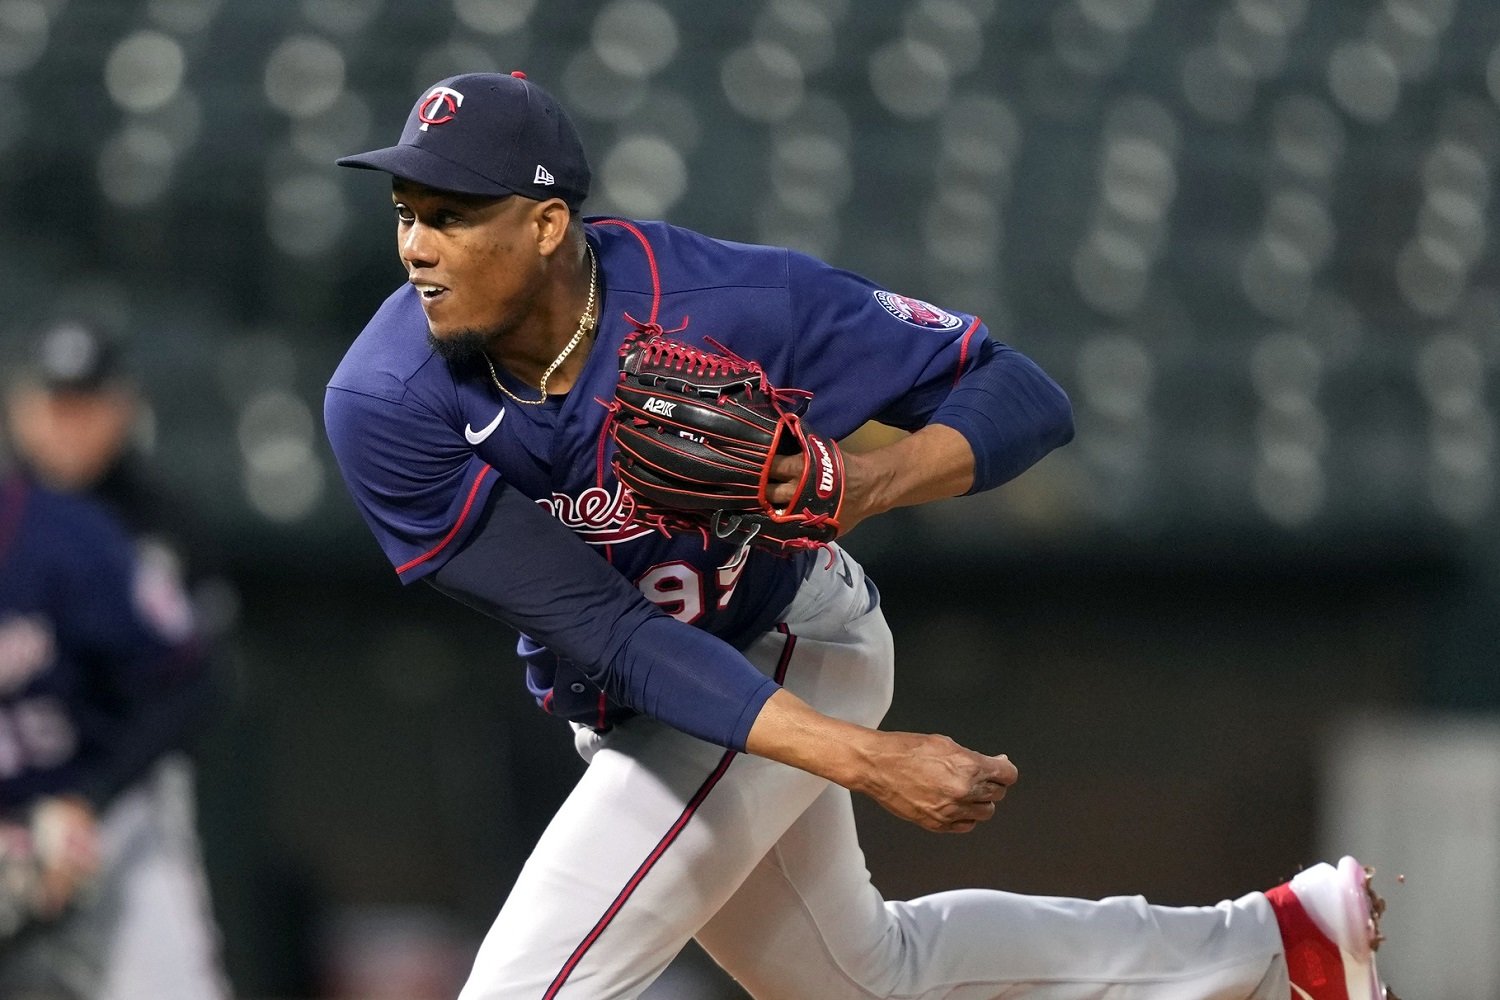 Is Yennier Cano the best reliever in baseball right now?